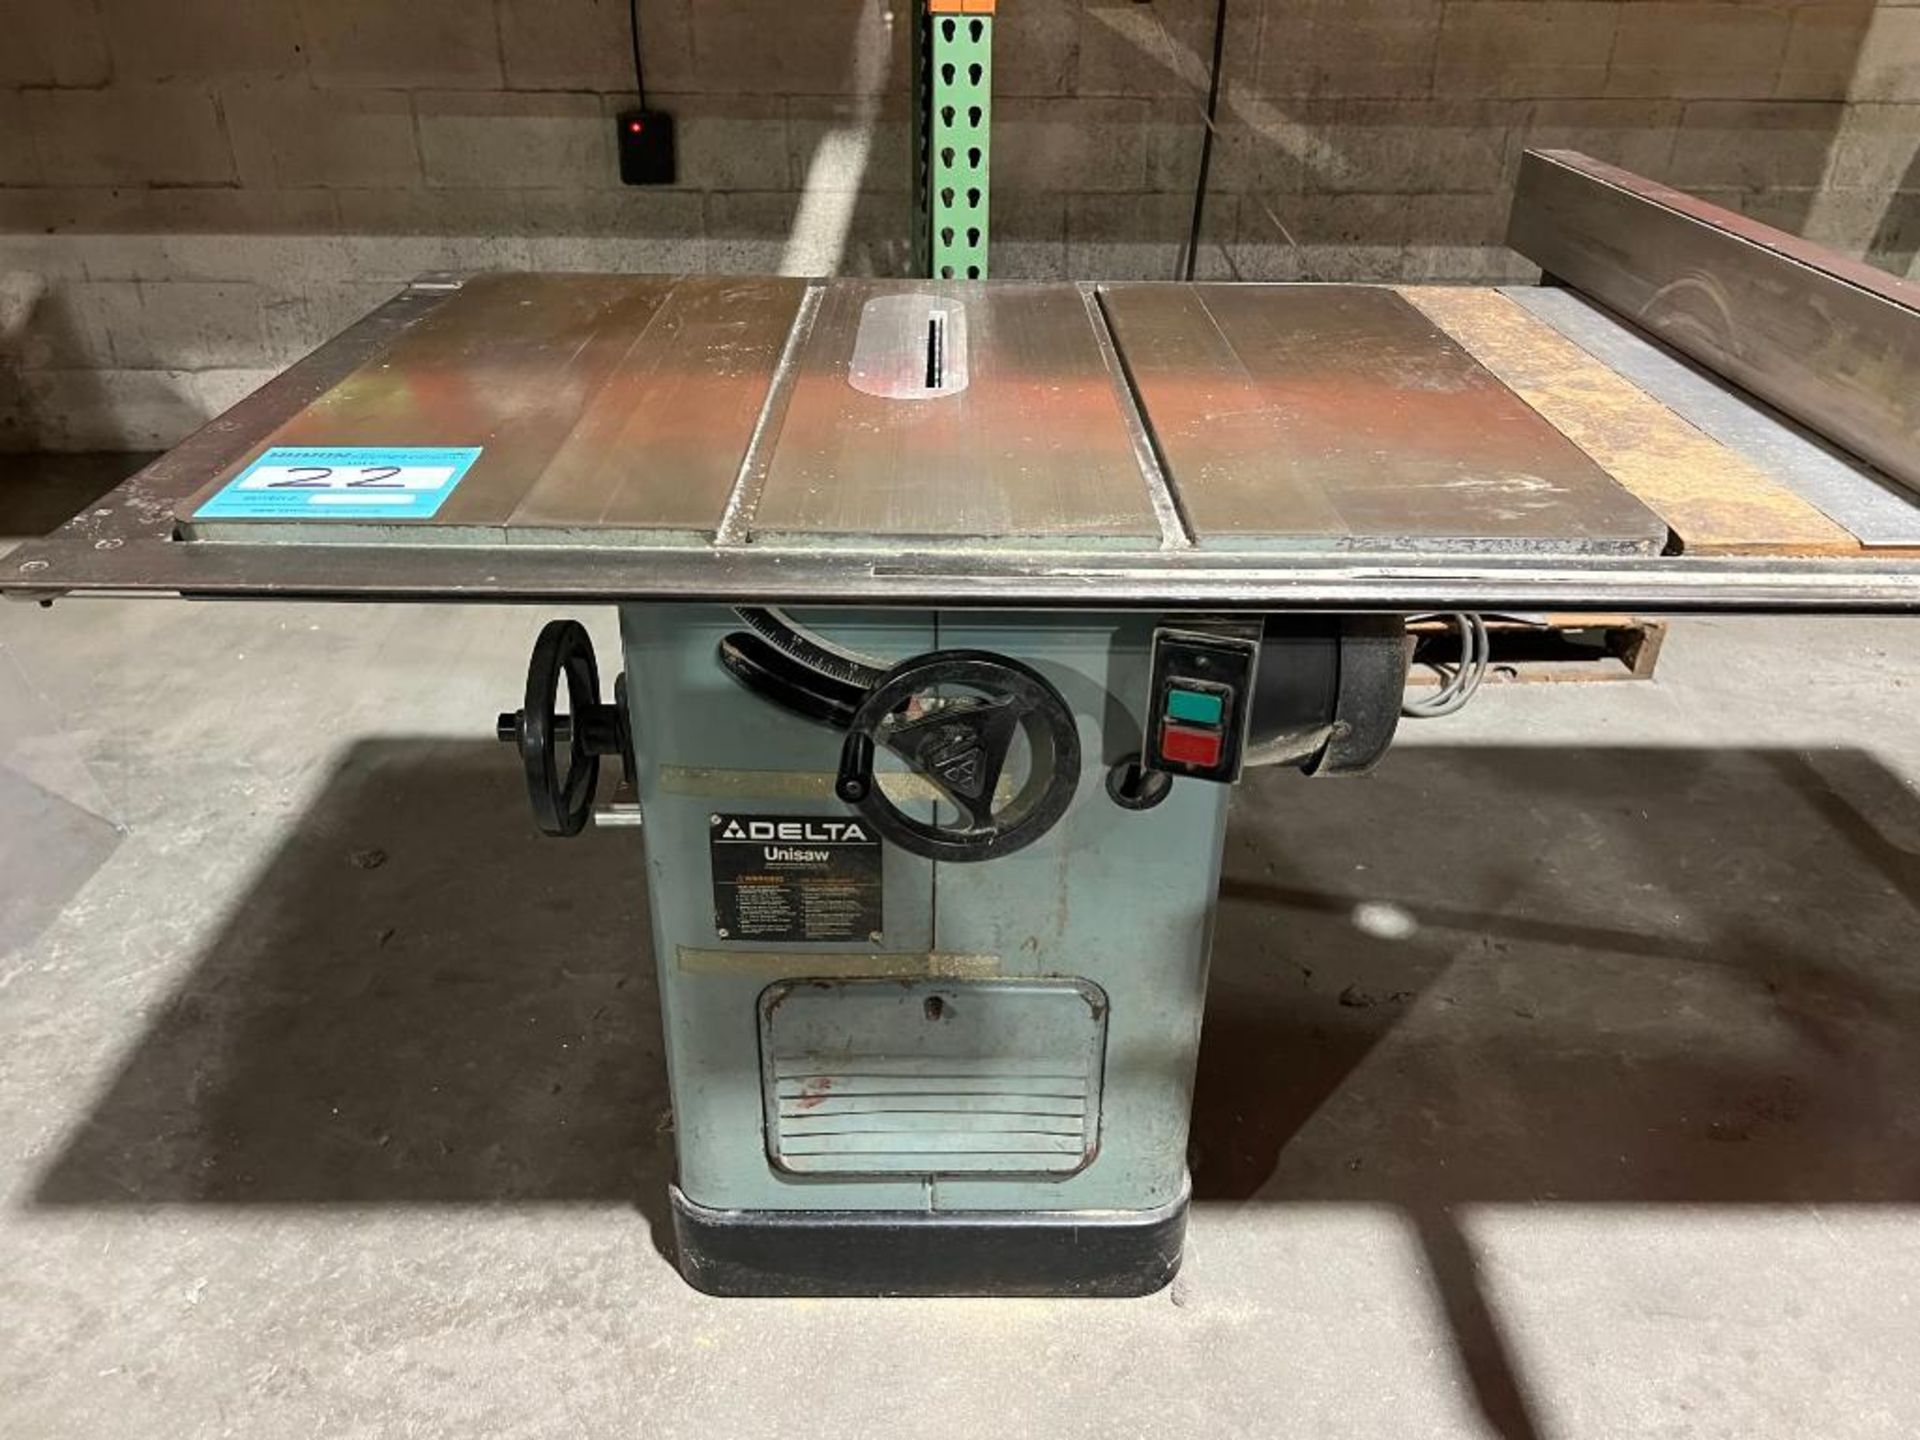 Delta Unisaw Table Saw, S/N 86B00540, 3 Phase Motor - Image 10 of 19